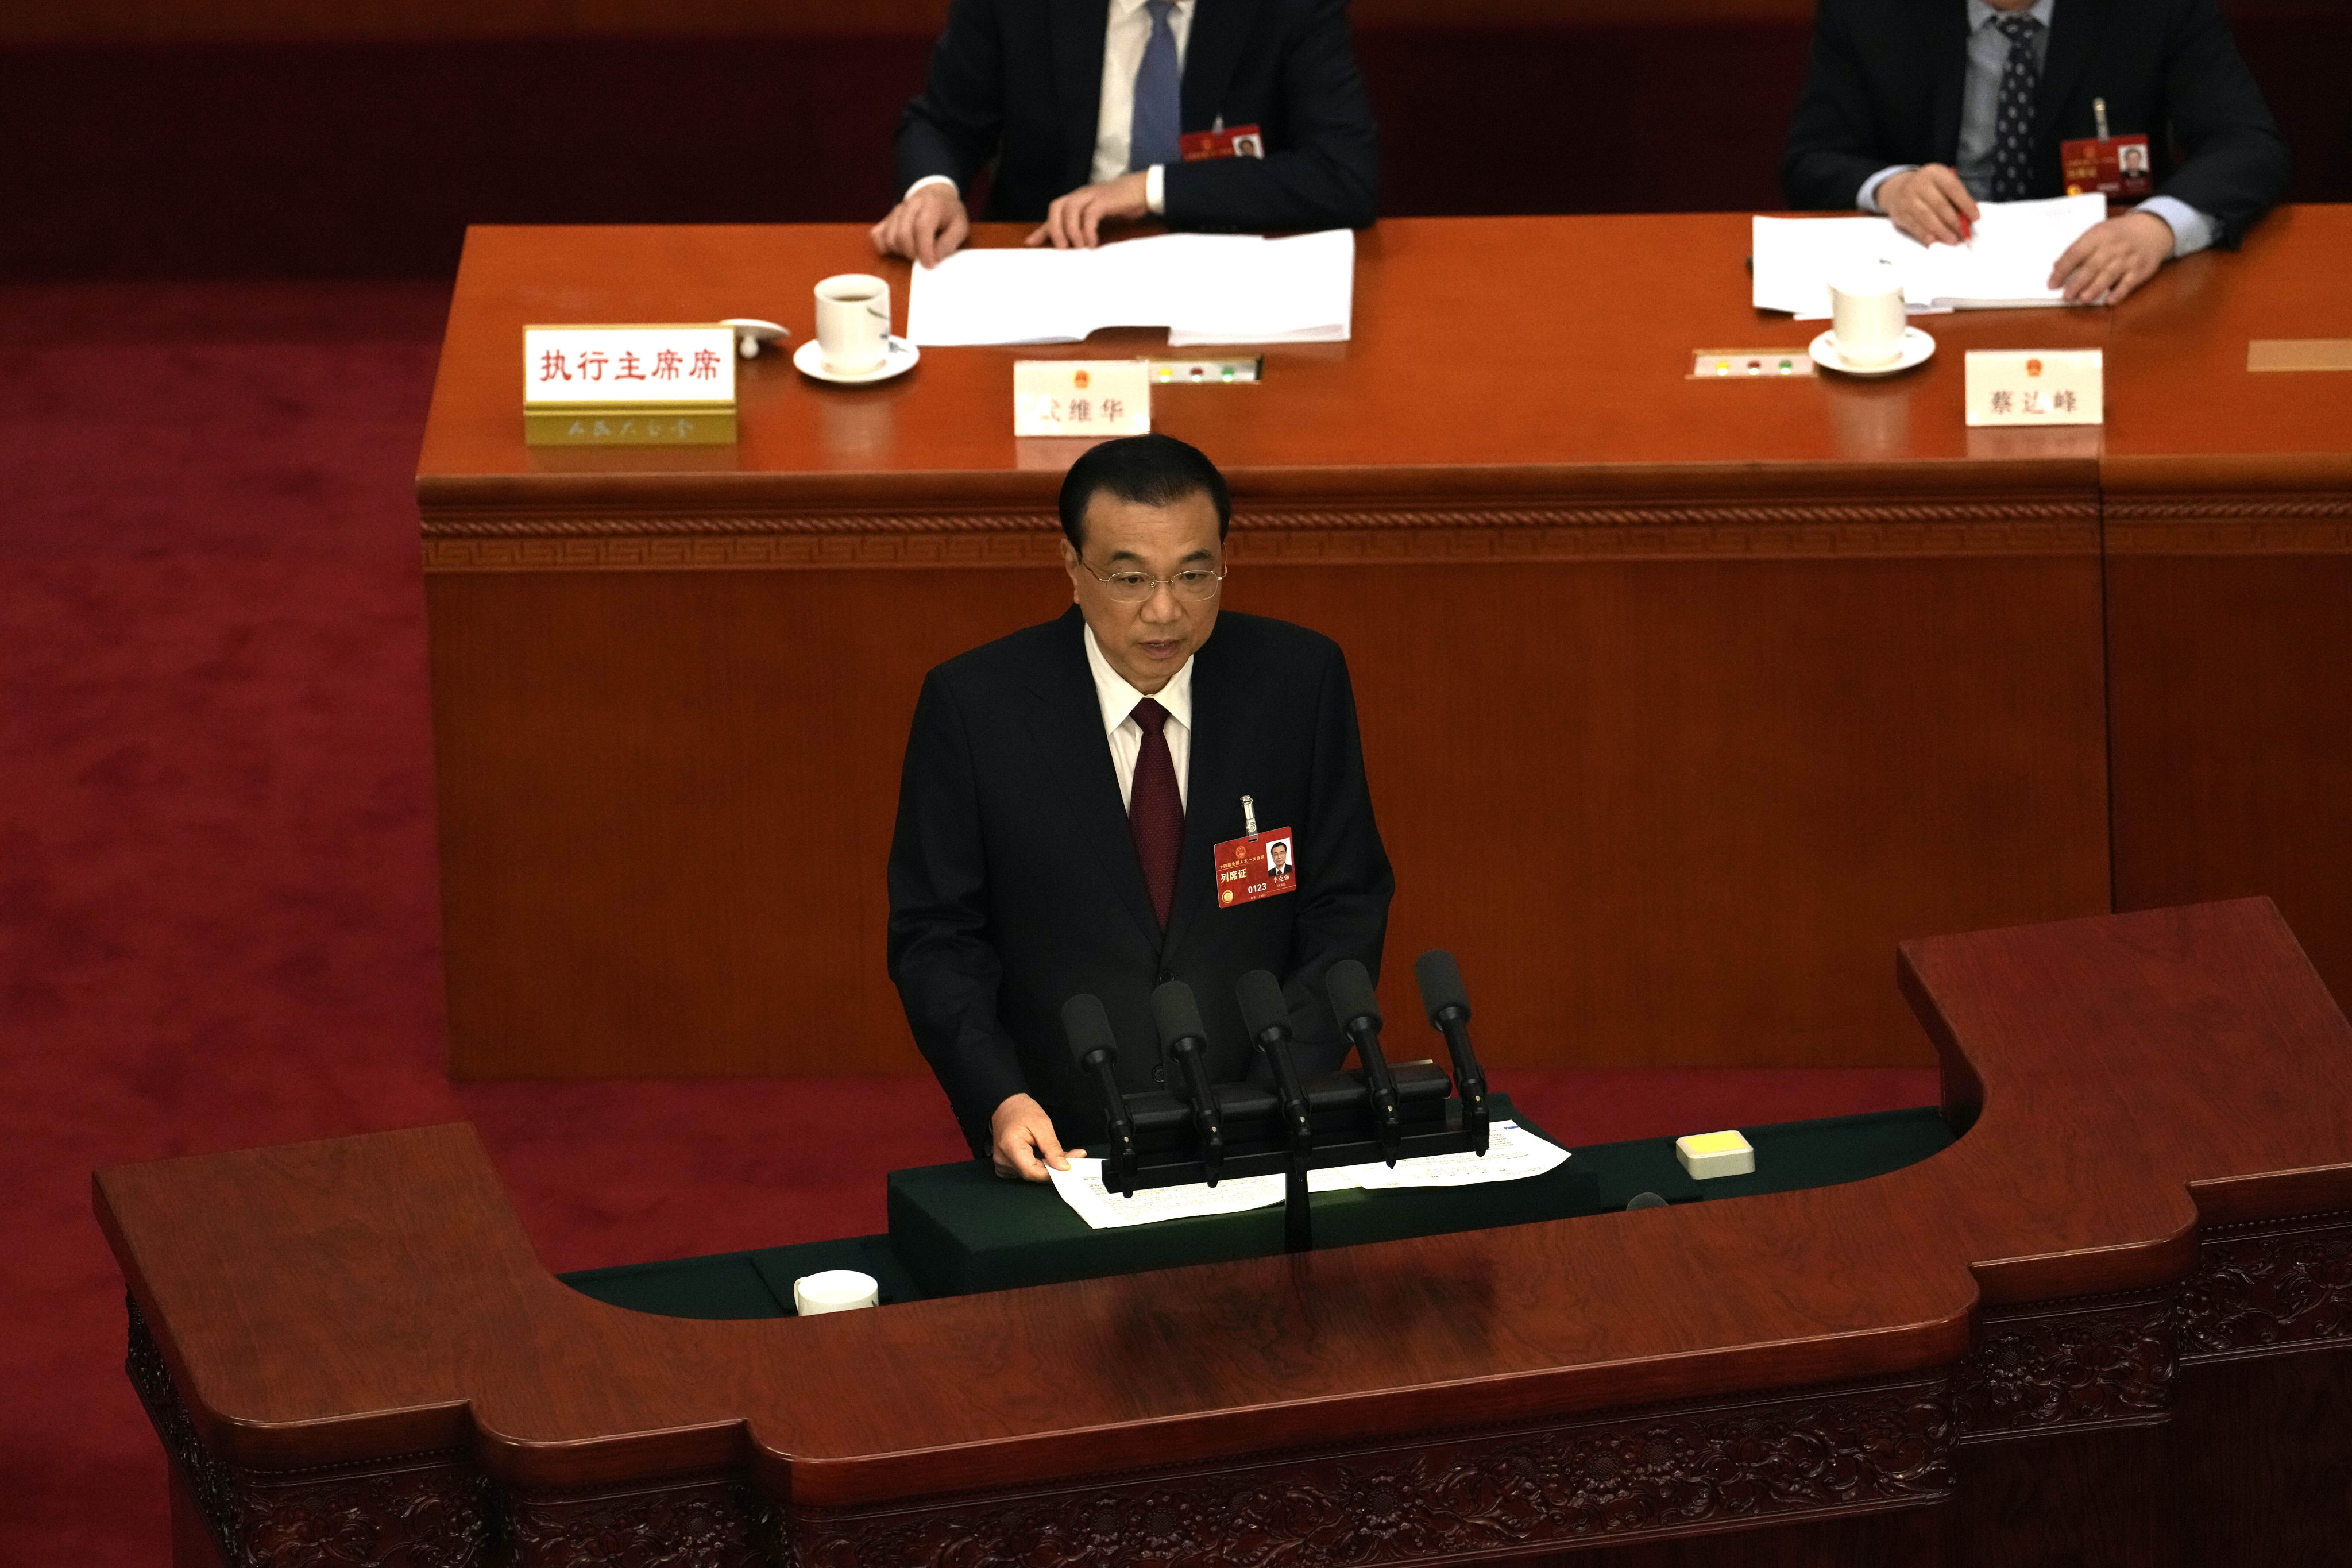 Chinese Premier Li Keqiang speaks during the opening session of China’s National People’s Congress in Beijing on Sunday. Photo: AP